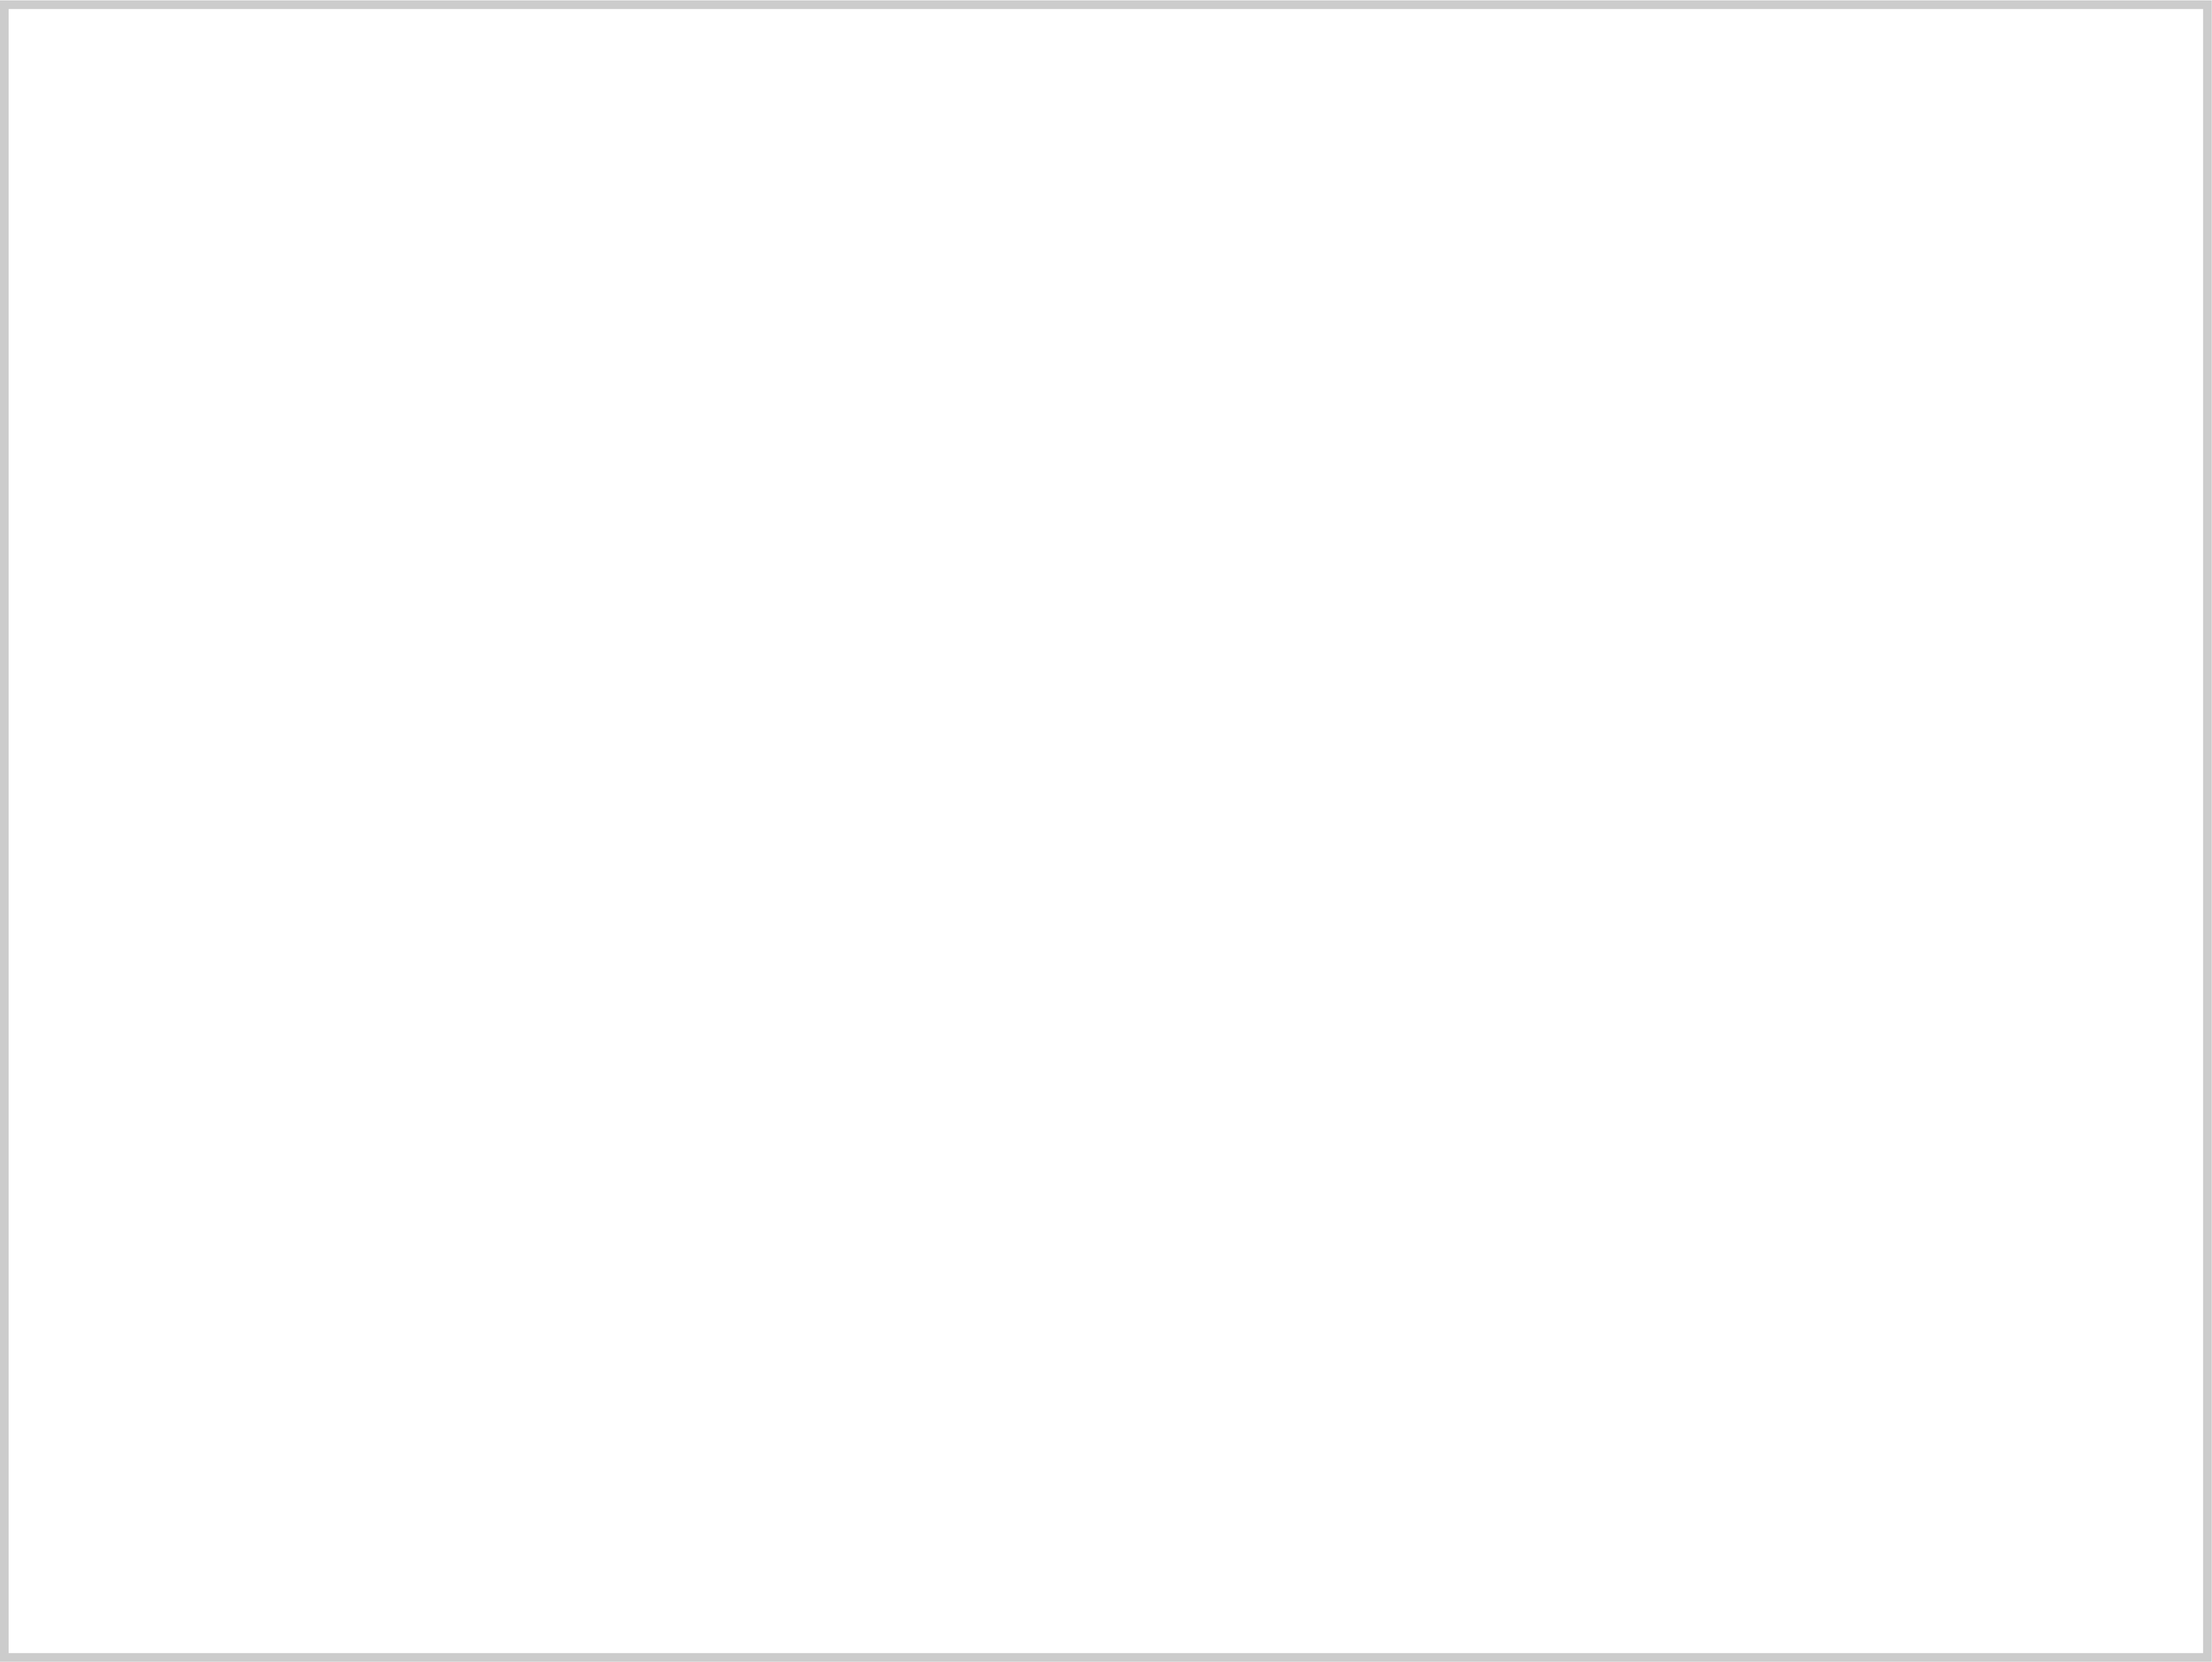 Bombshell client for ad creative design, The Eczema Company